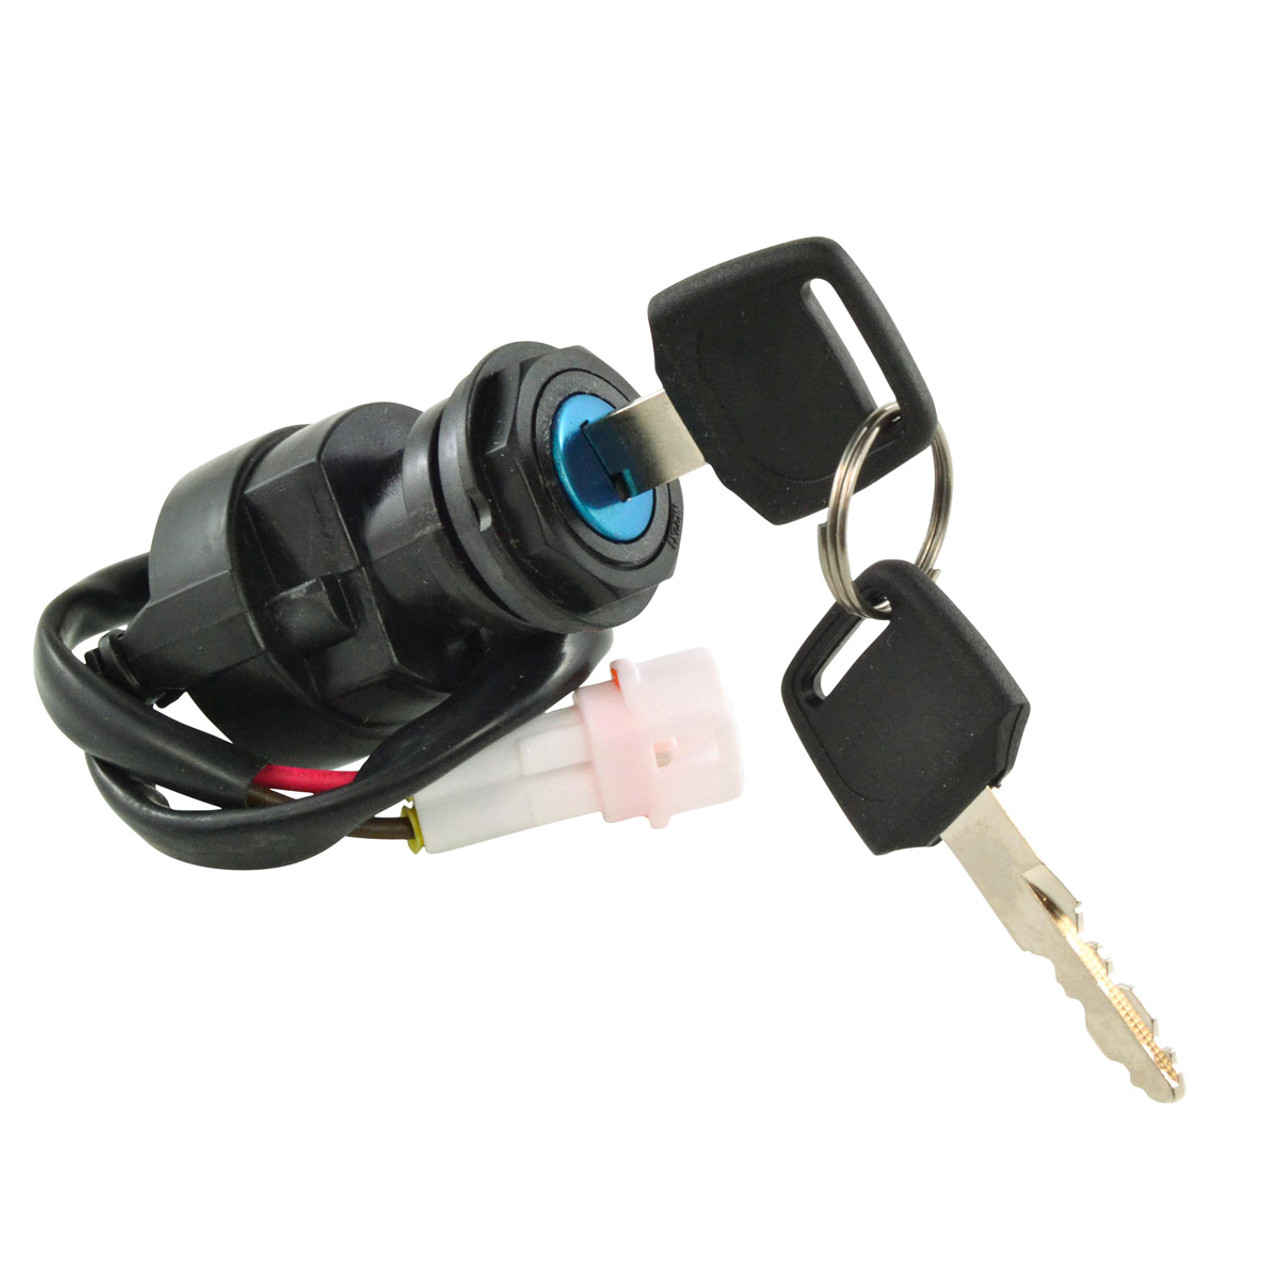 RMSTATOR New Aftermarket Yamaha 2-Position Ignition Key Switch, RM05005